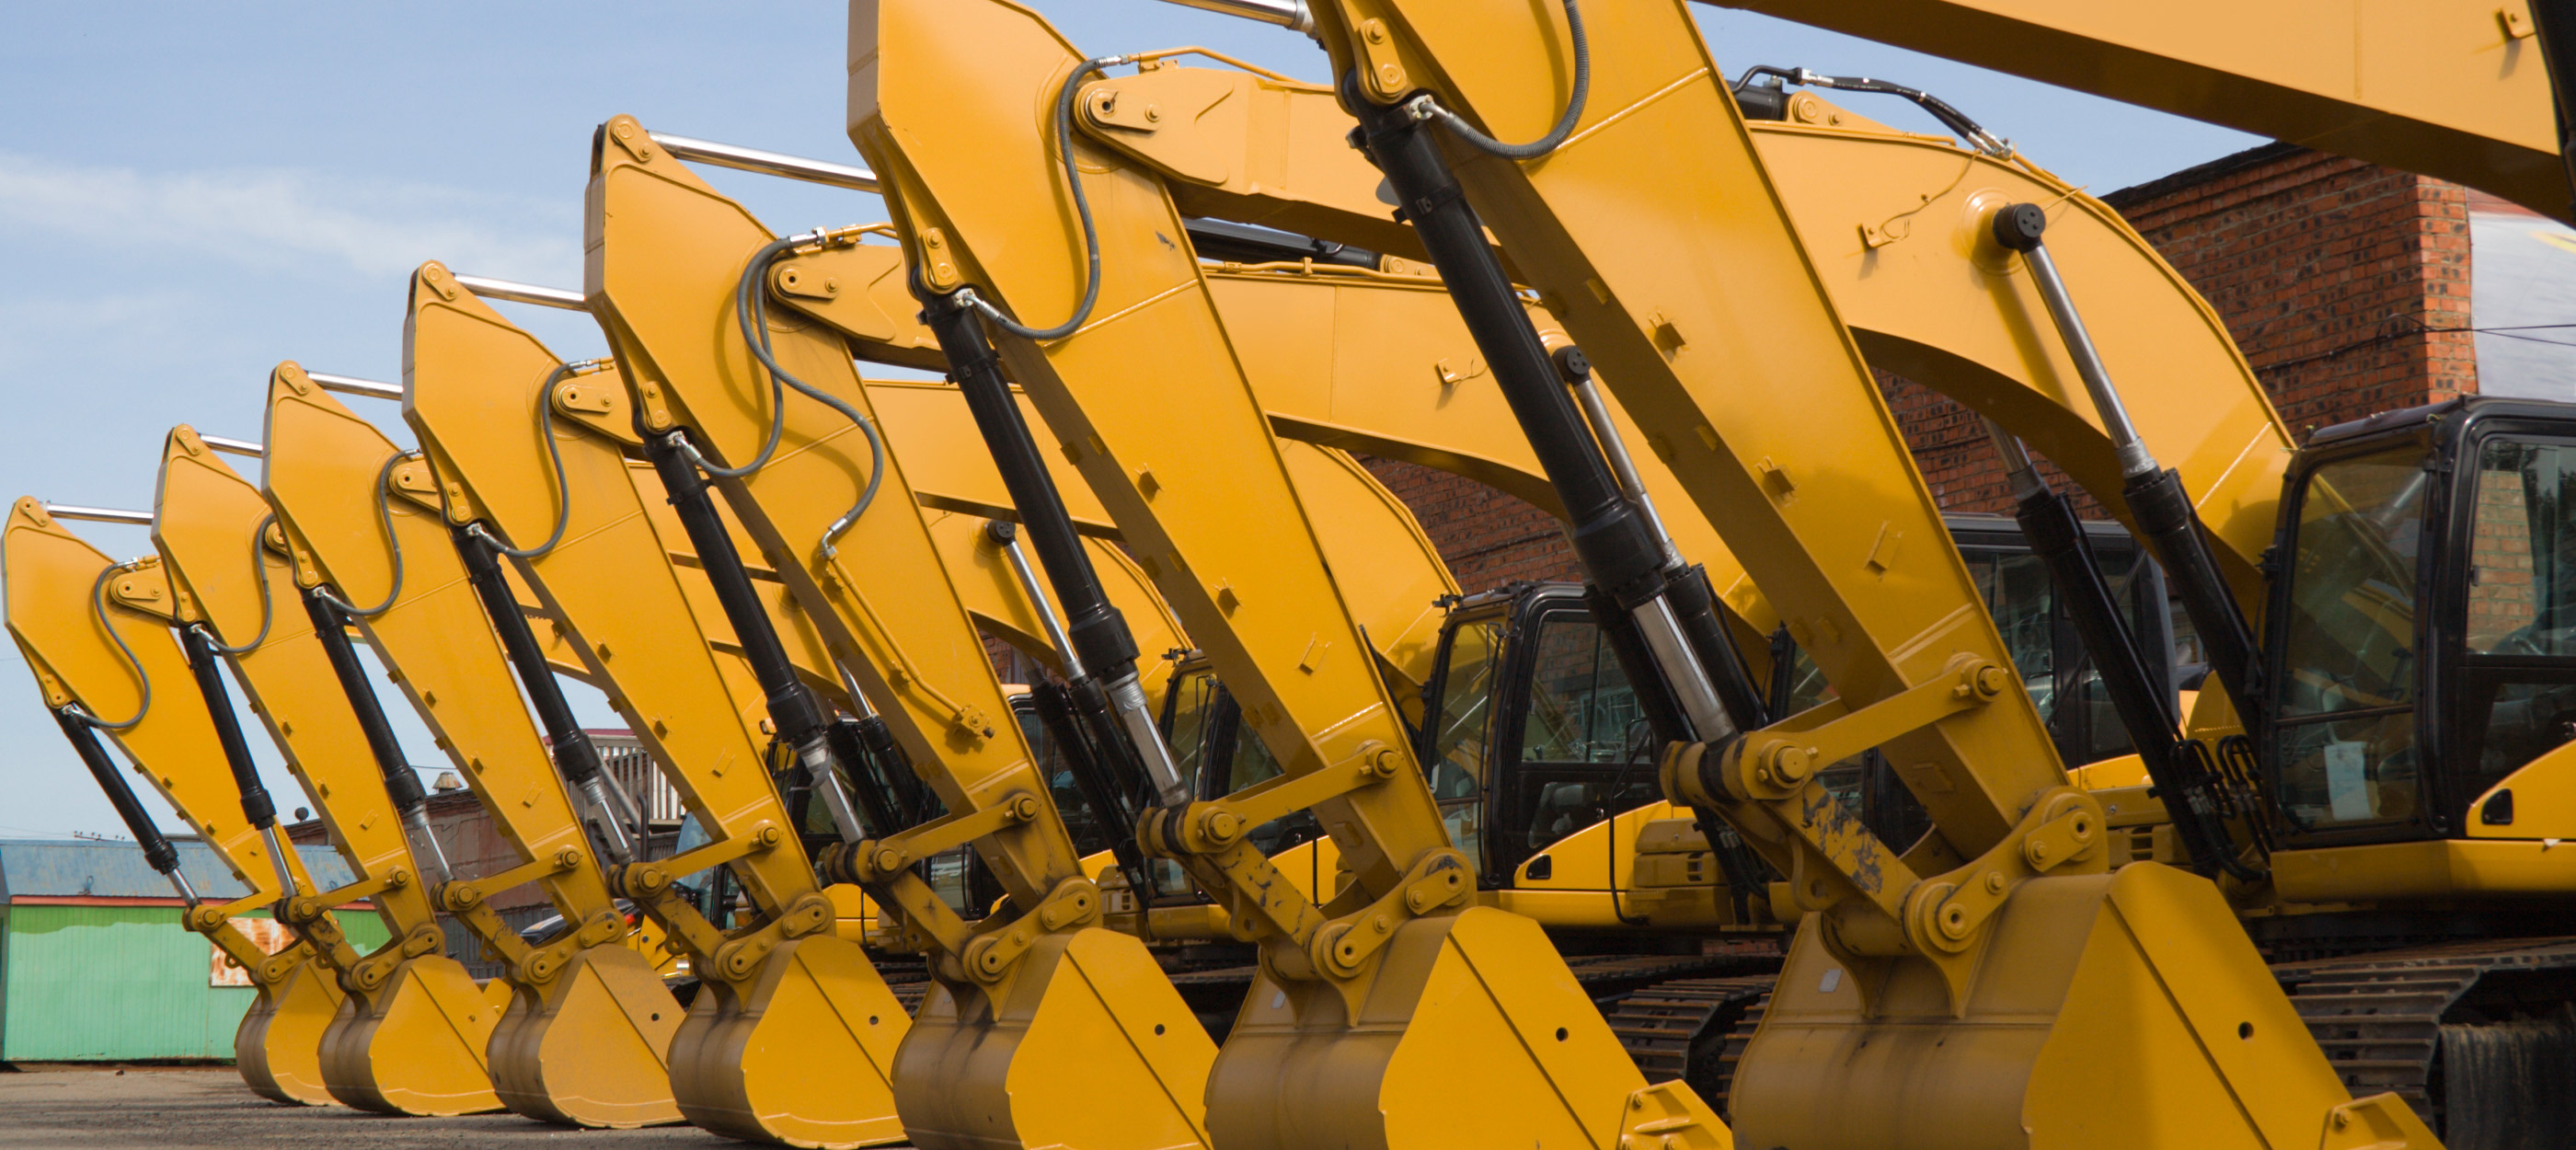 There’s more urgency than ever to offer online equipment financing. Dina Beaucage talks about the digital shift and what it means for equipment dealers.